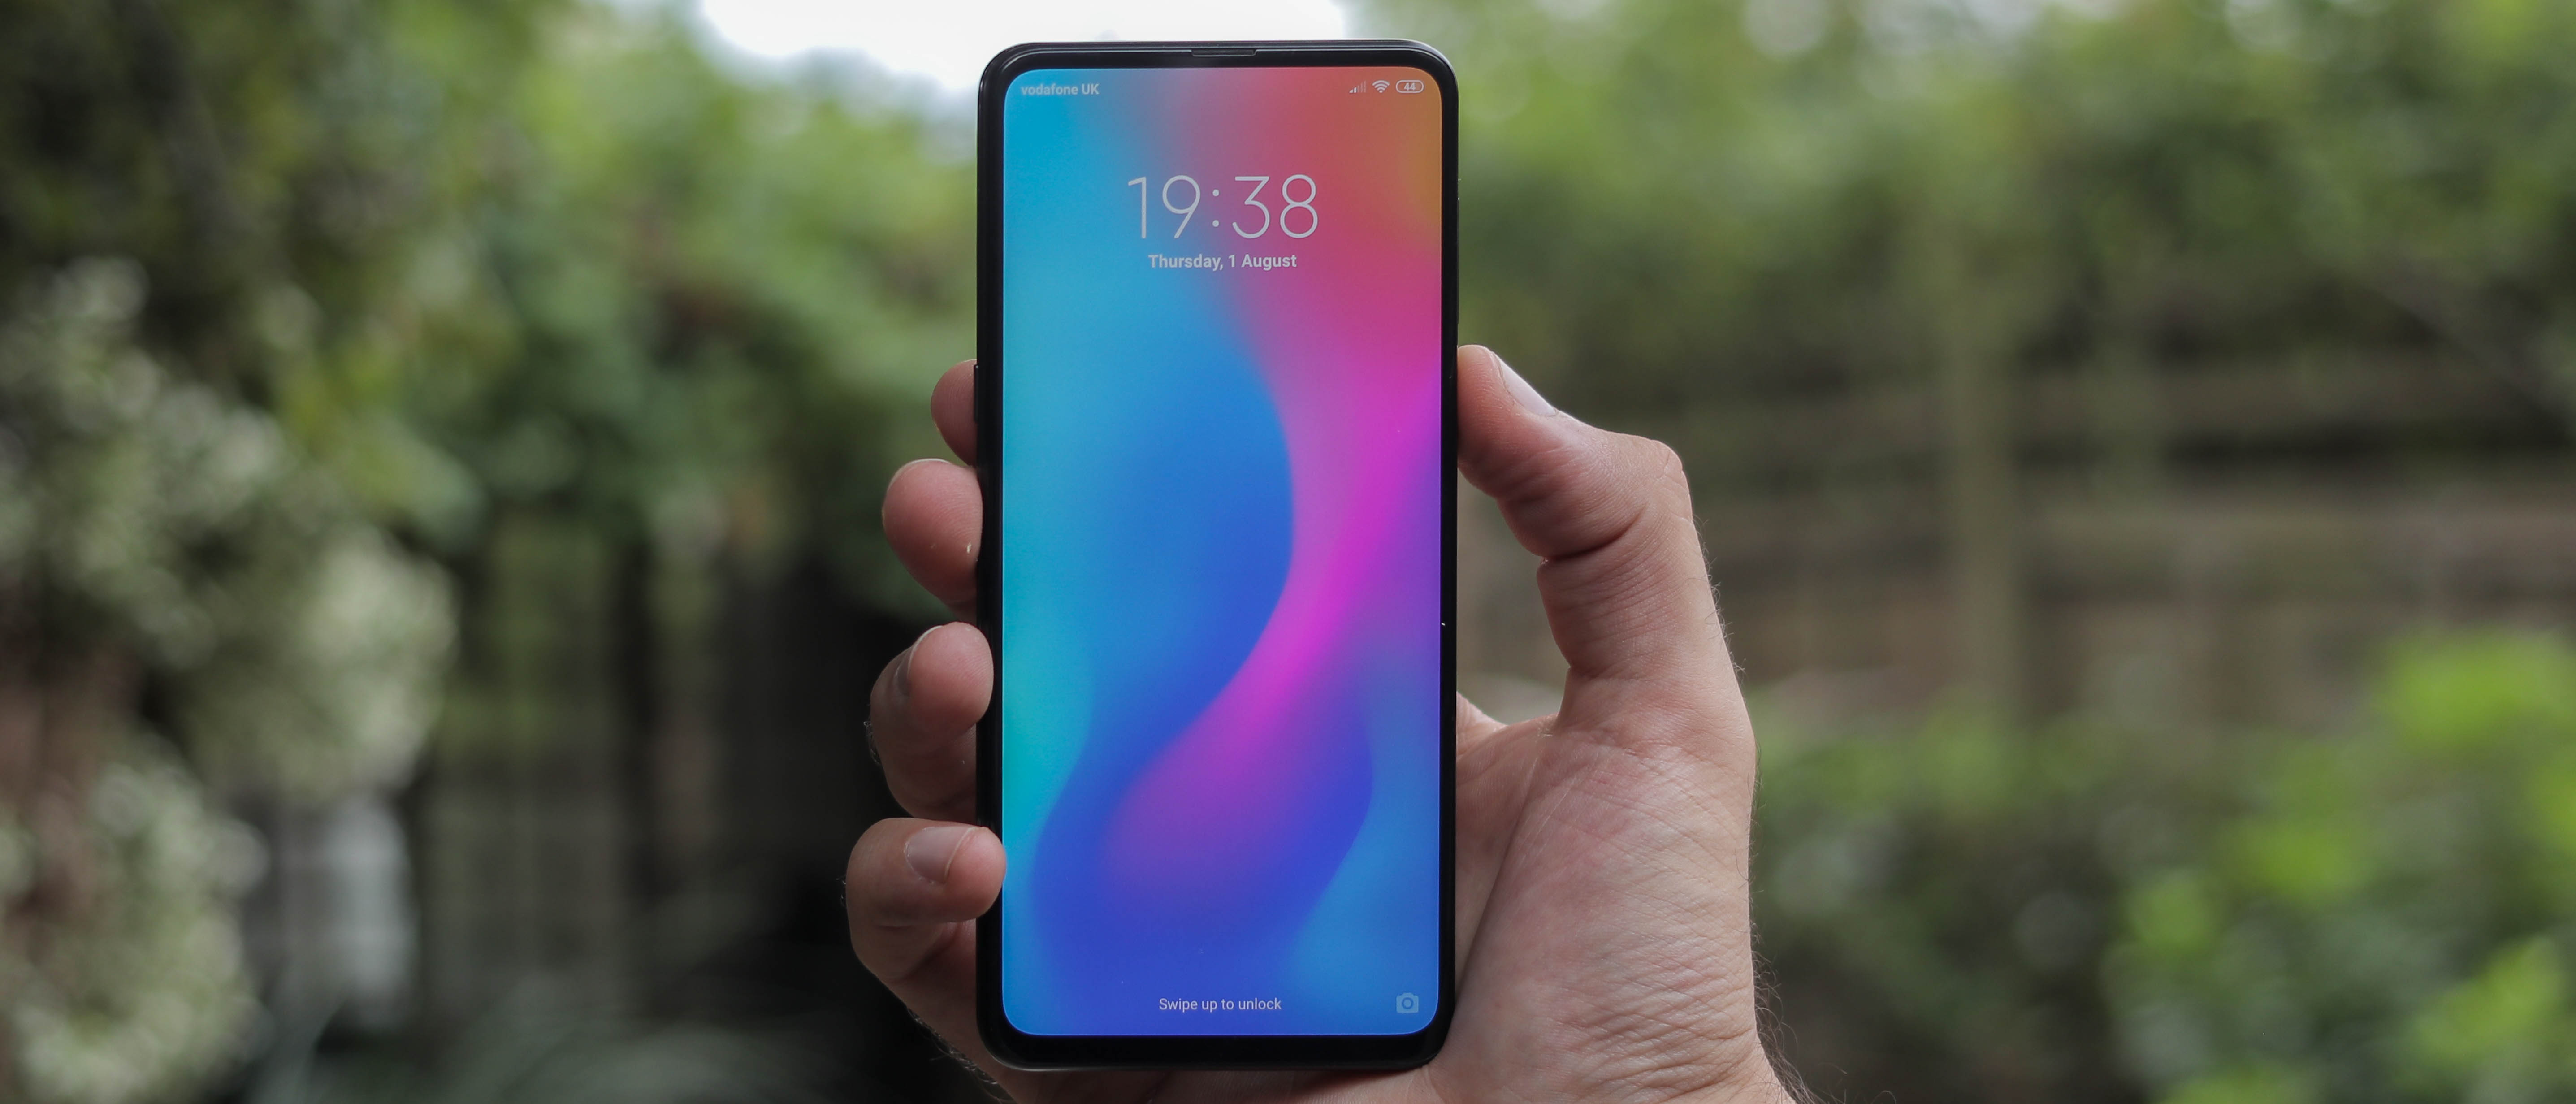 Simuler inch Sund mad Anything else I should know? - Xiaomi Mi Mix 3 5G review | TechRadar